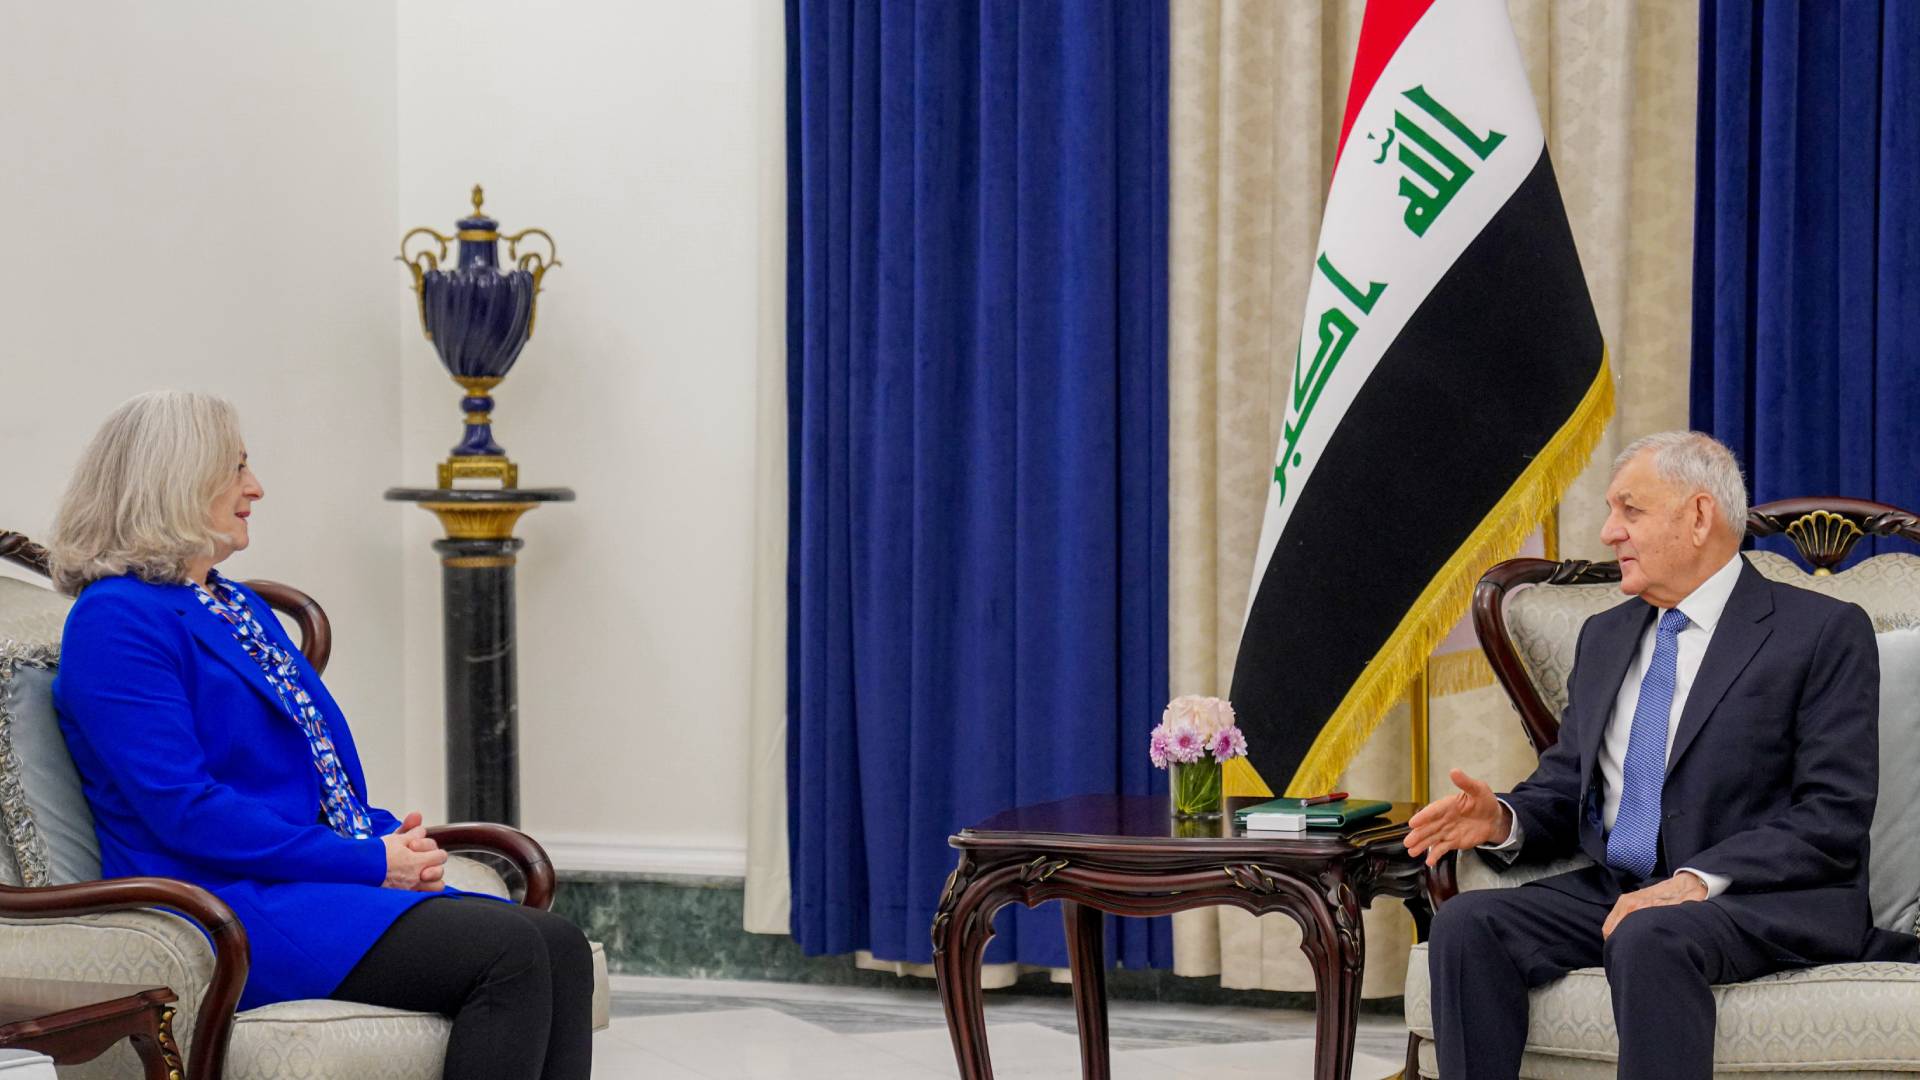  Iraqi President on the right and U.S. Ambassador on the left.